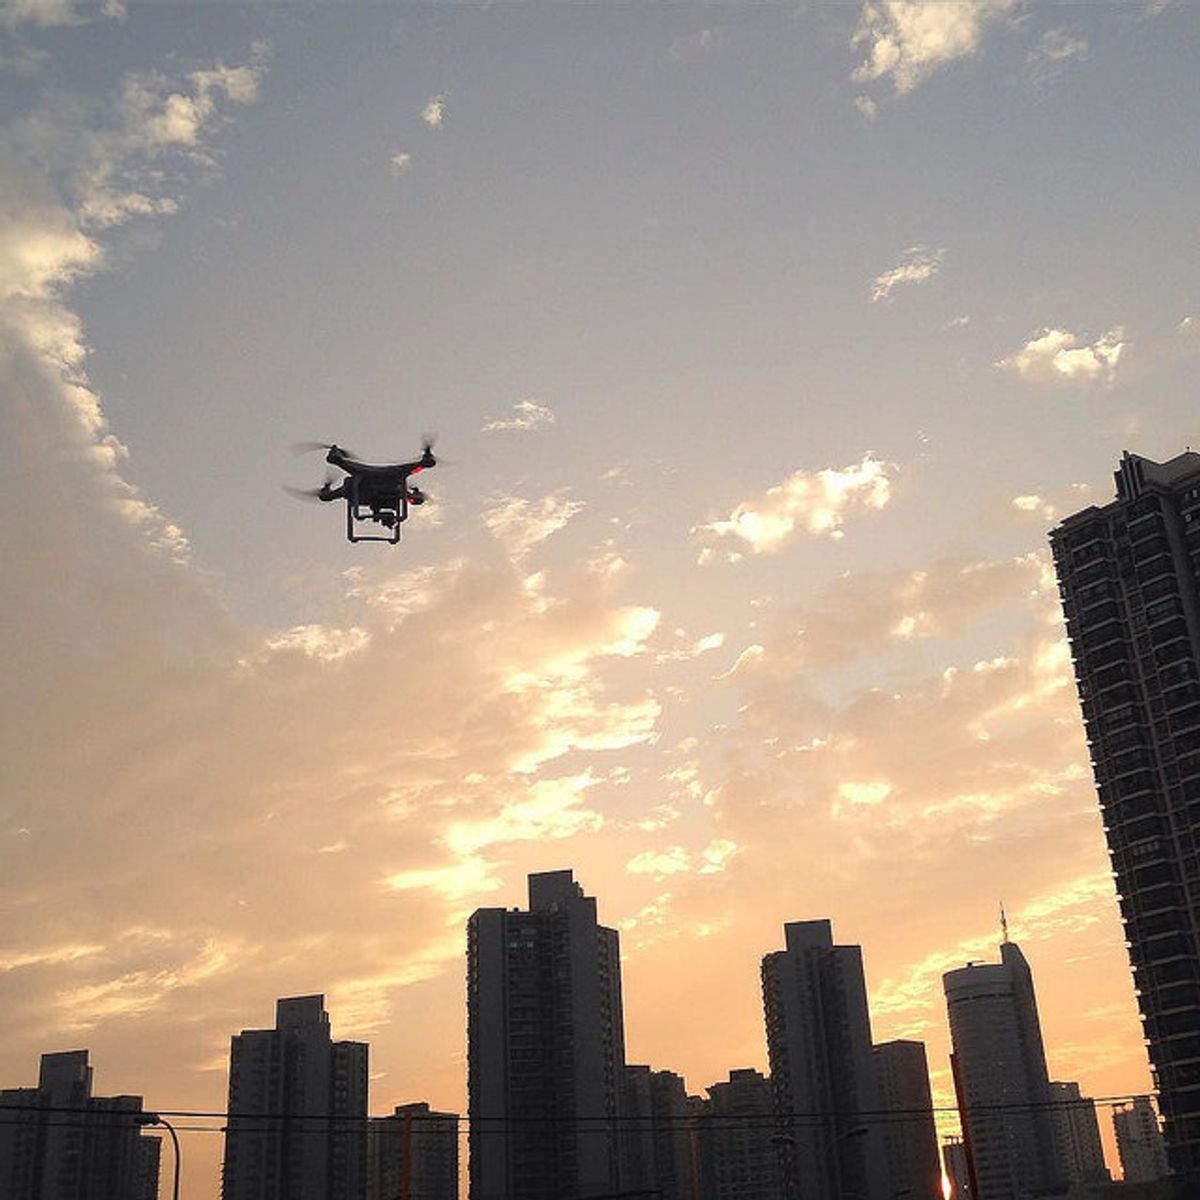 You Probably Shouldn't Expect City Repairing Drones Any Time Soon